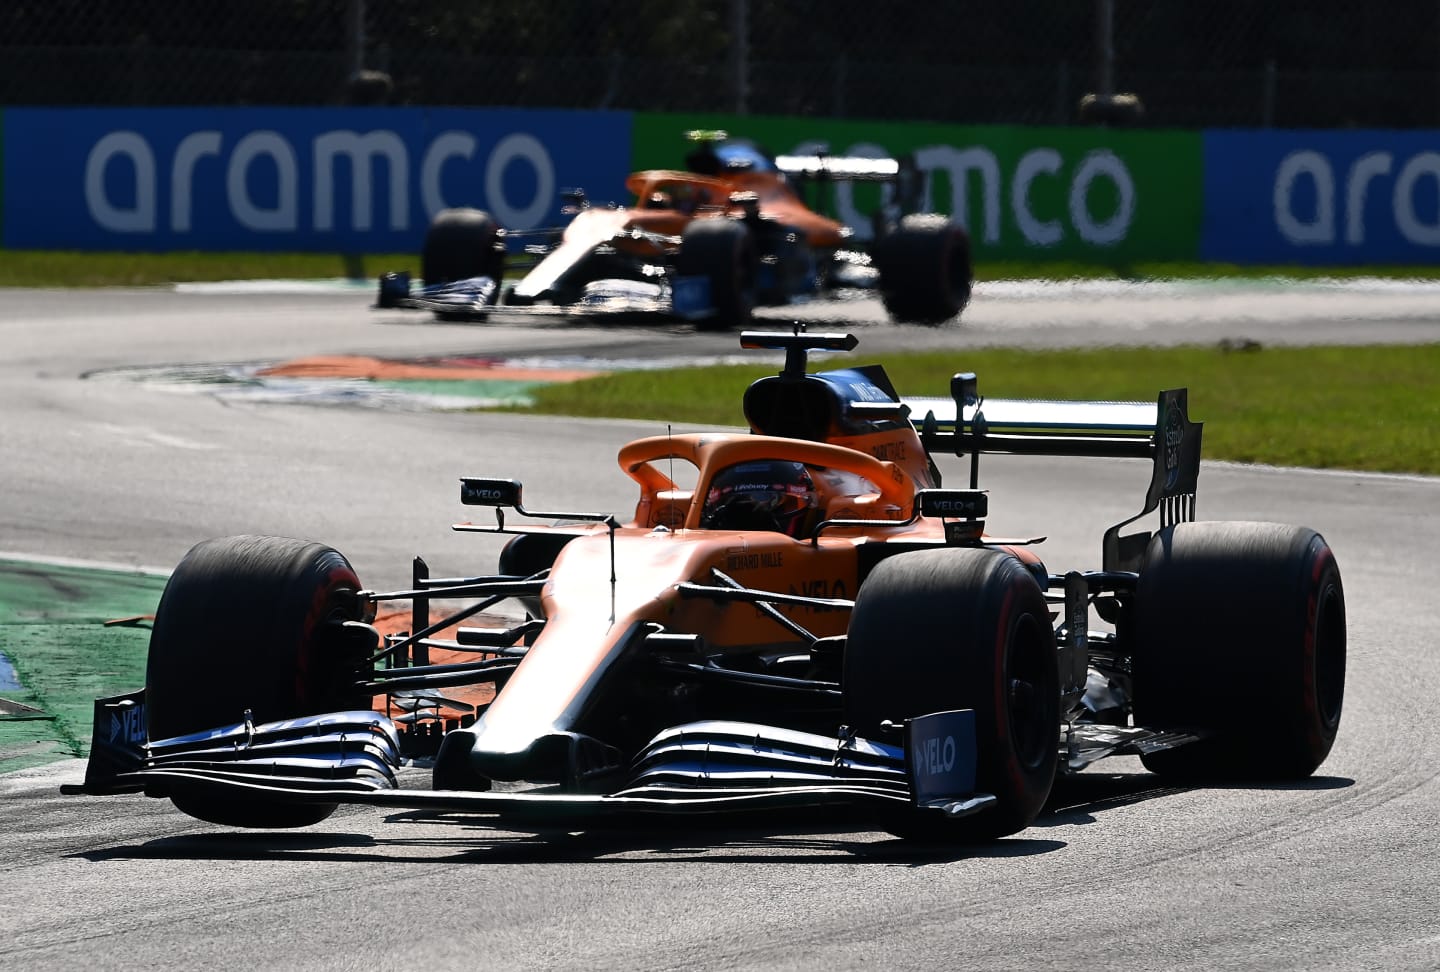 MONZA, ITALY - SEPTEMBER 06: Carlos Sainz of Spain driving the (55) McLaren F1 Team MCL35 Renault during the F1 Grand Prix of Italy at Autodromo di Monza on September 06, 2020 in Monza, Italy. (Photo by Clive Mason - Formula 1/Formula 1 via Getty Images)